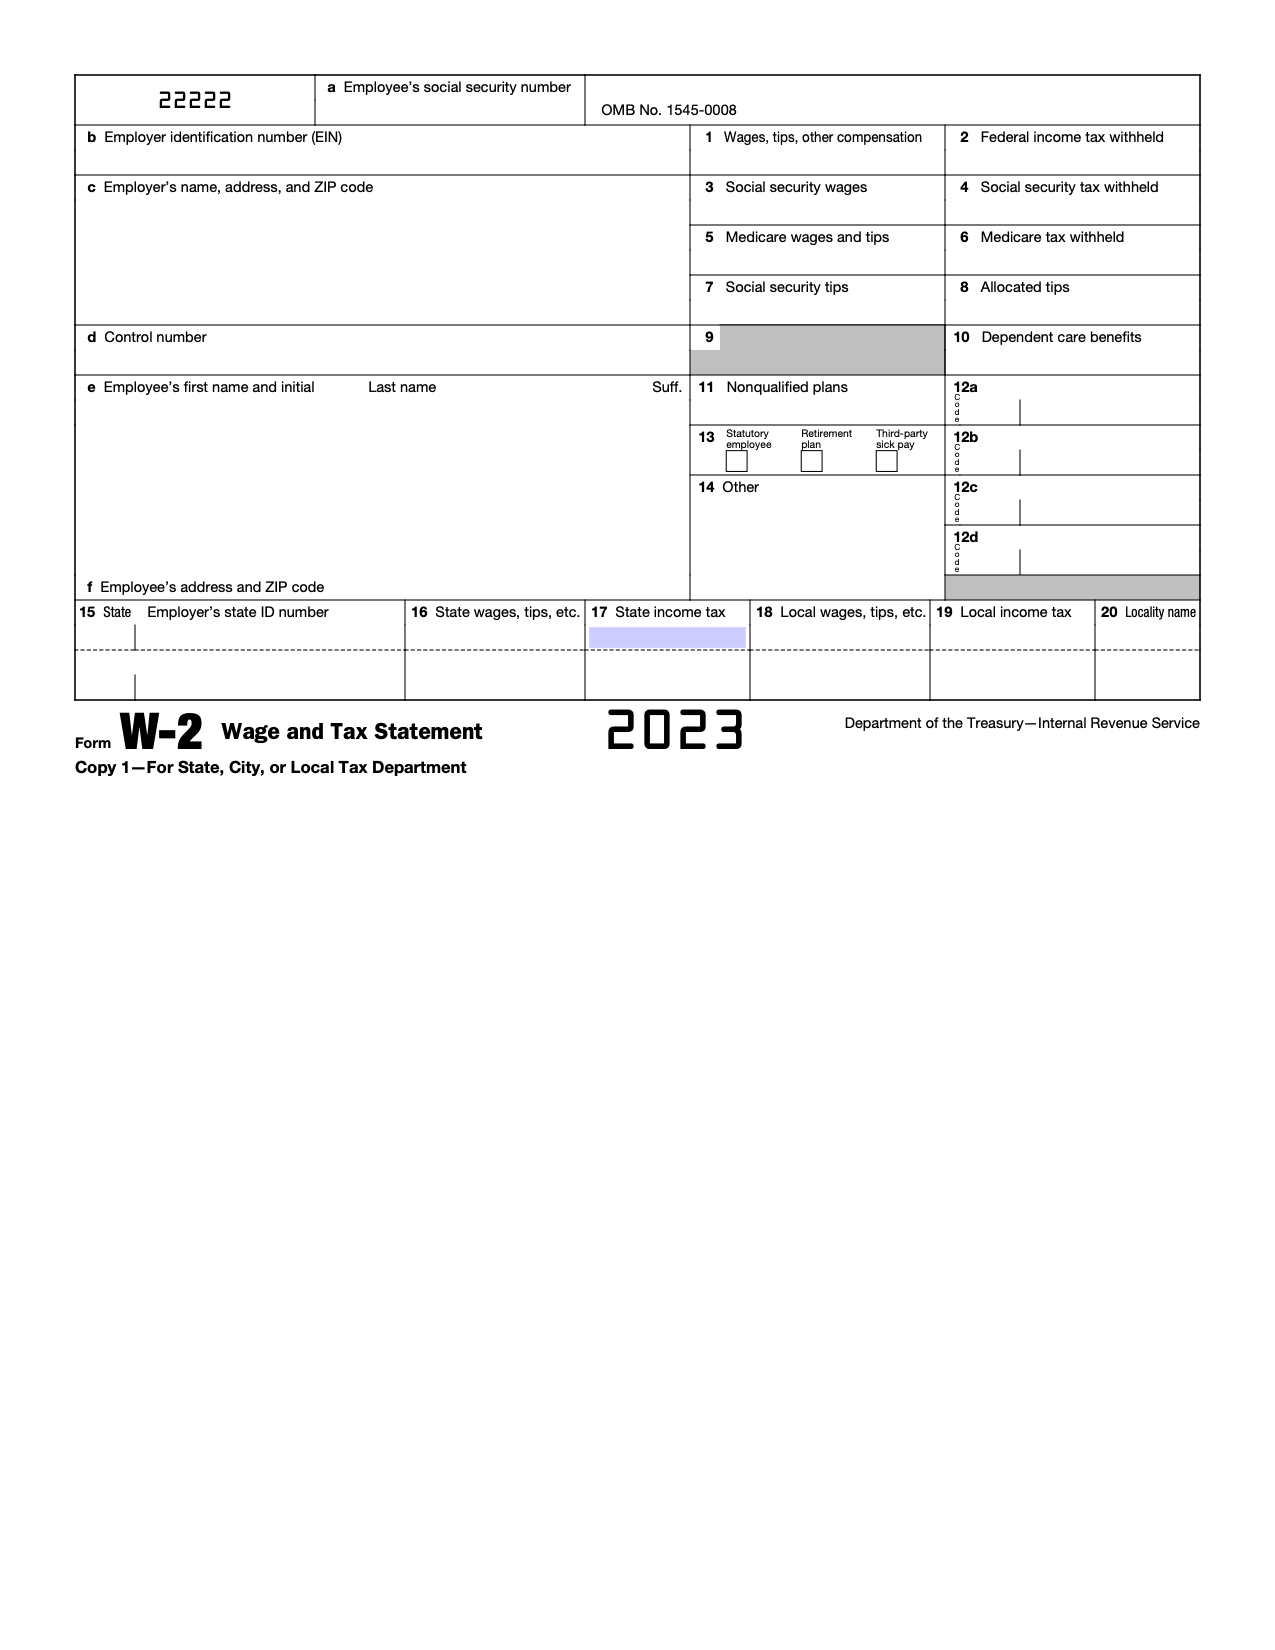 Free Irs Form W-2 | Wage And Tax Statement - Pdf – Eforms with Free W2 Form Template